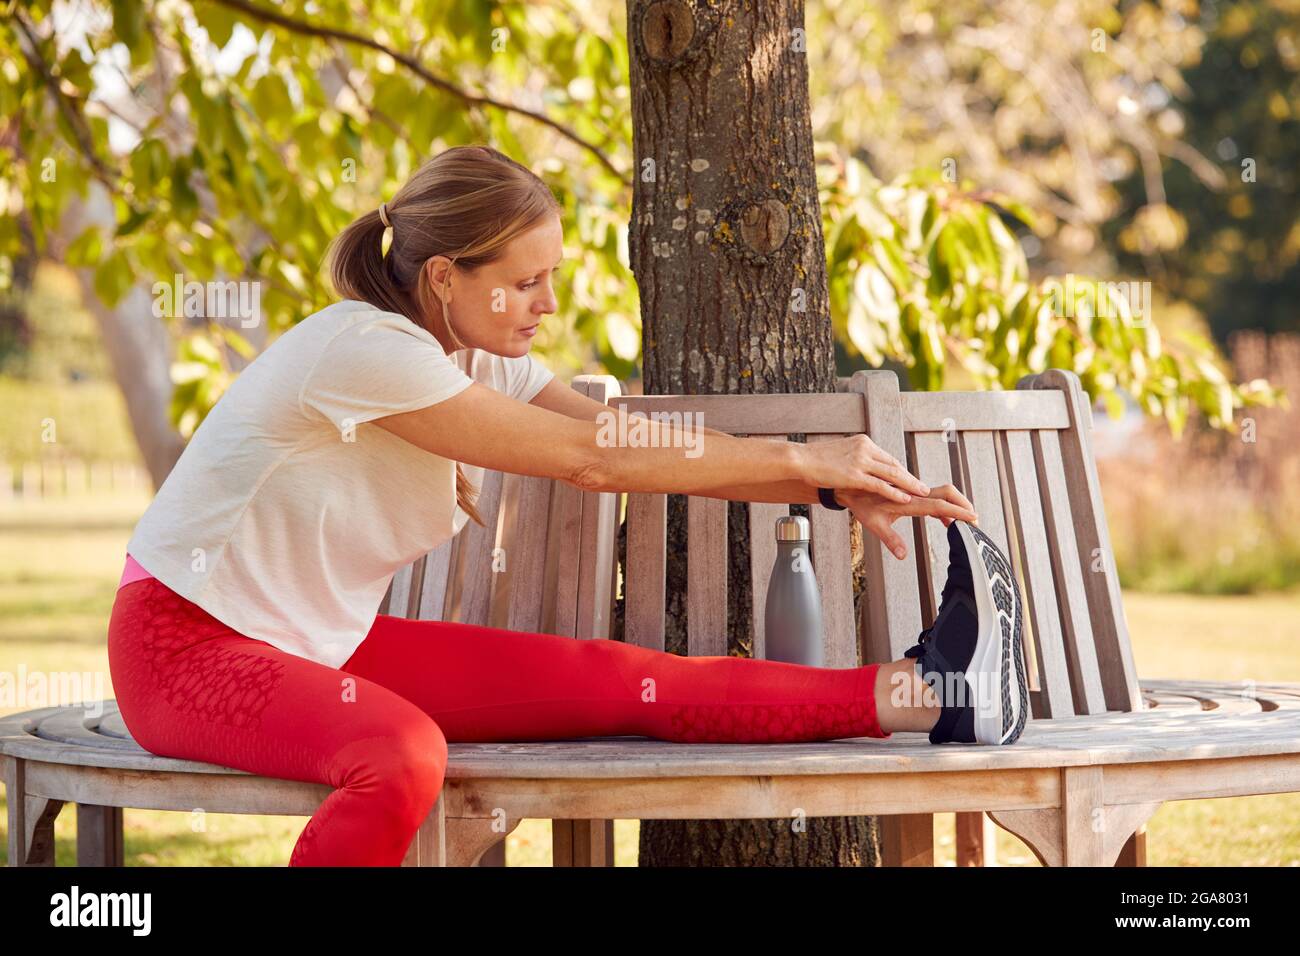 Women Tagged style:Leggings - Bench